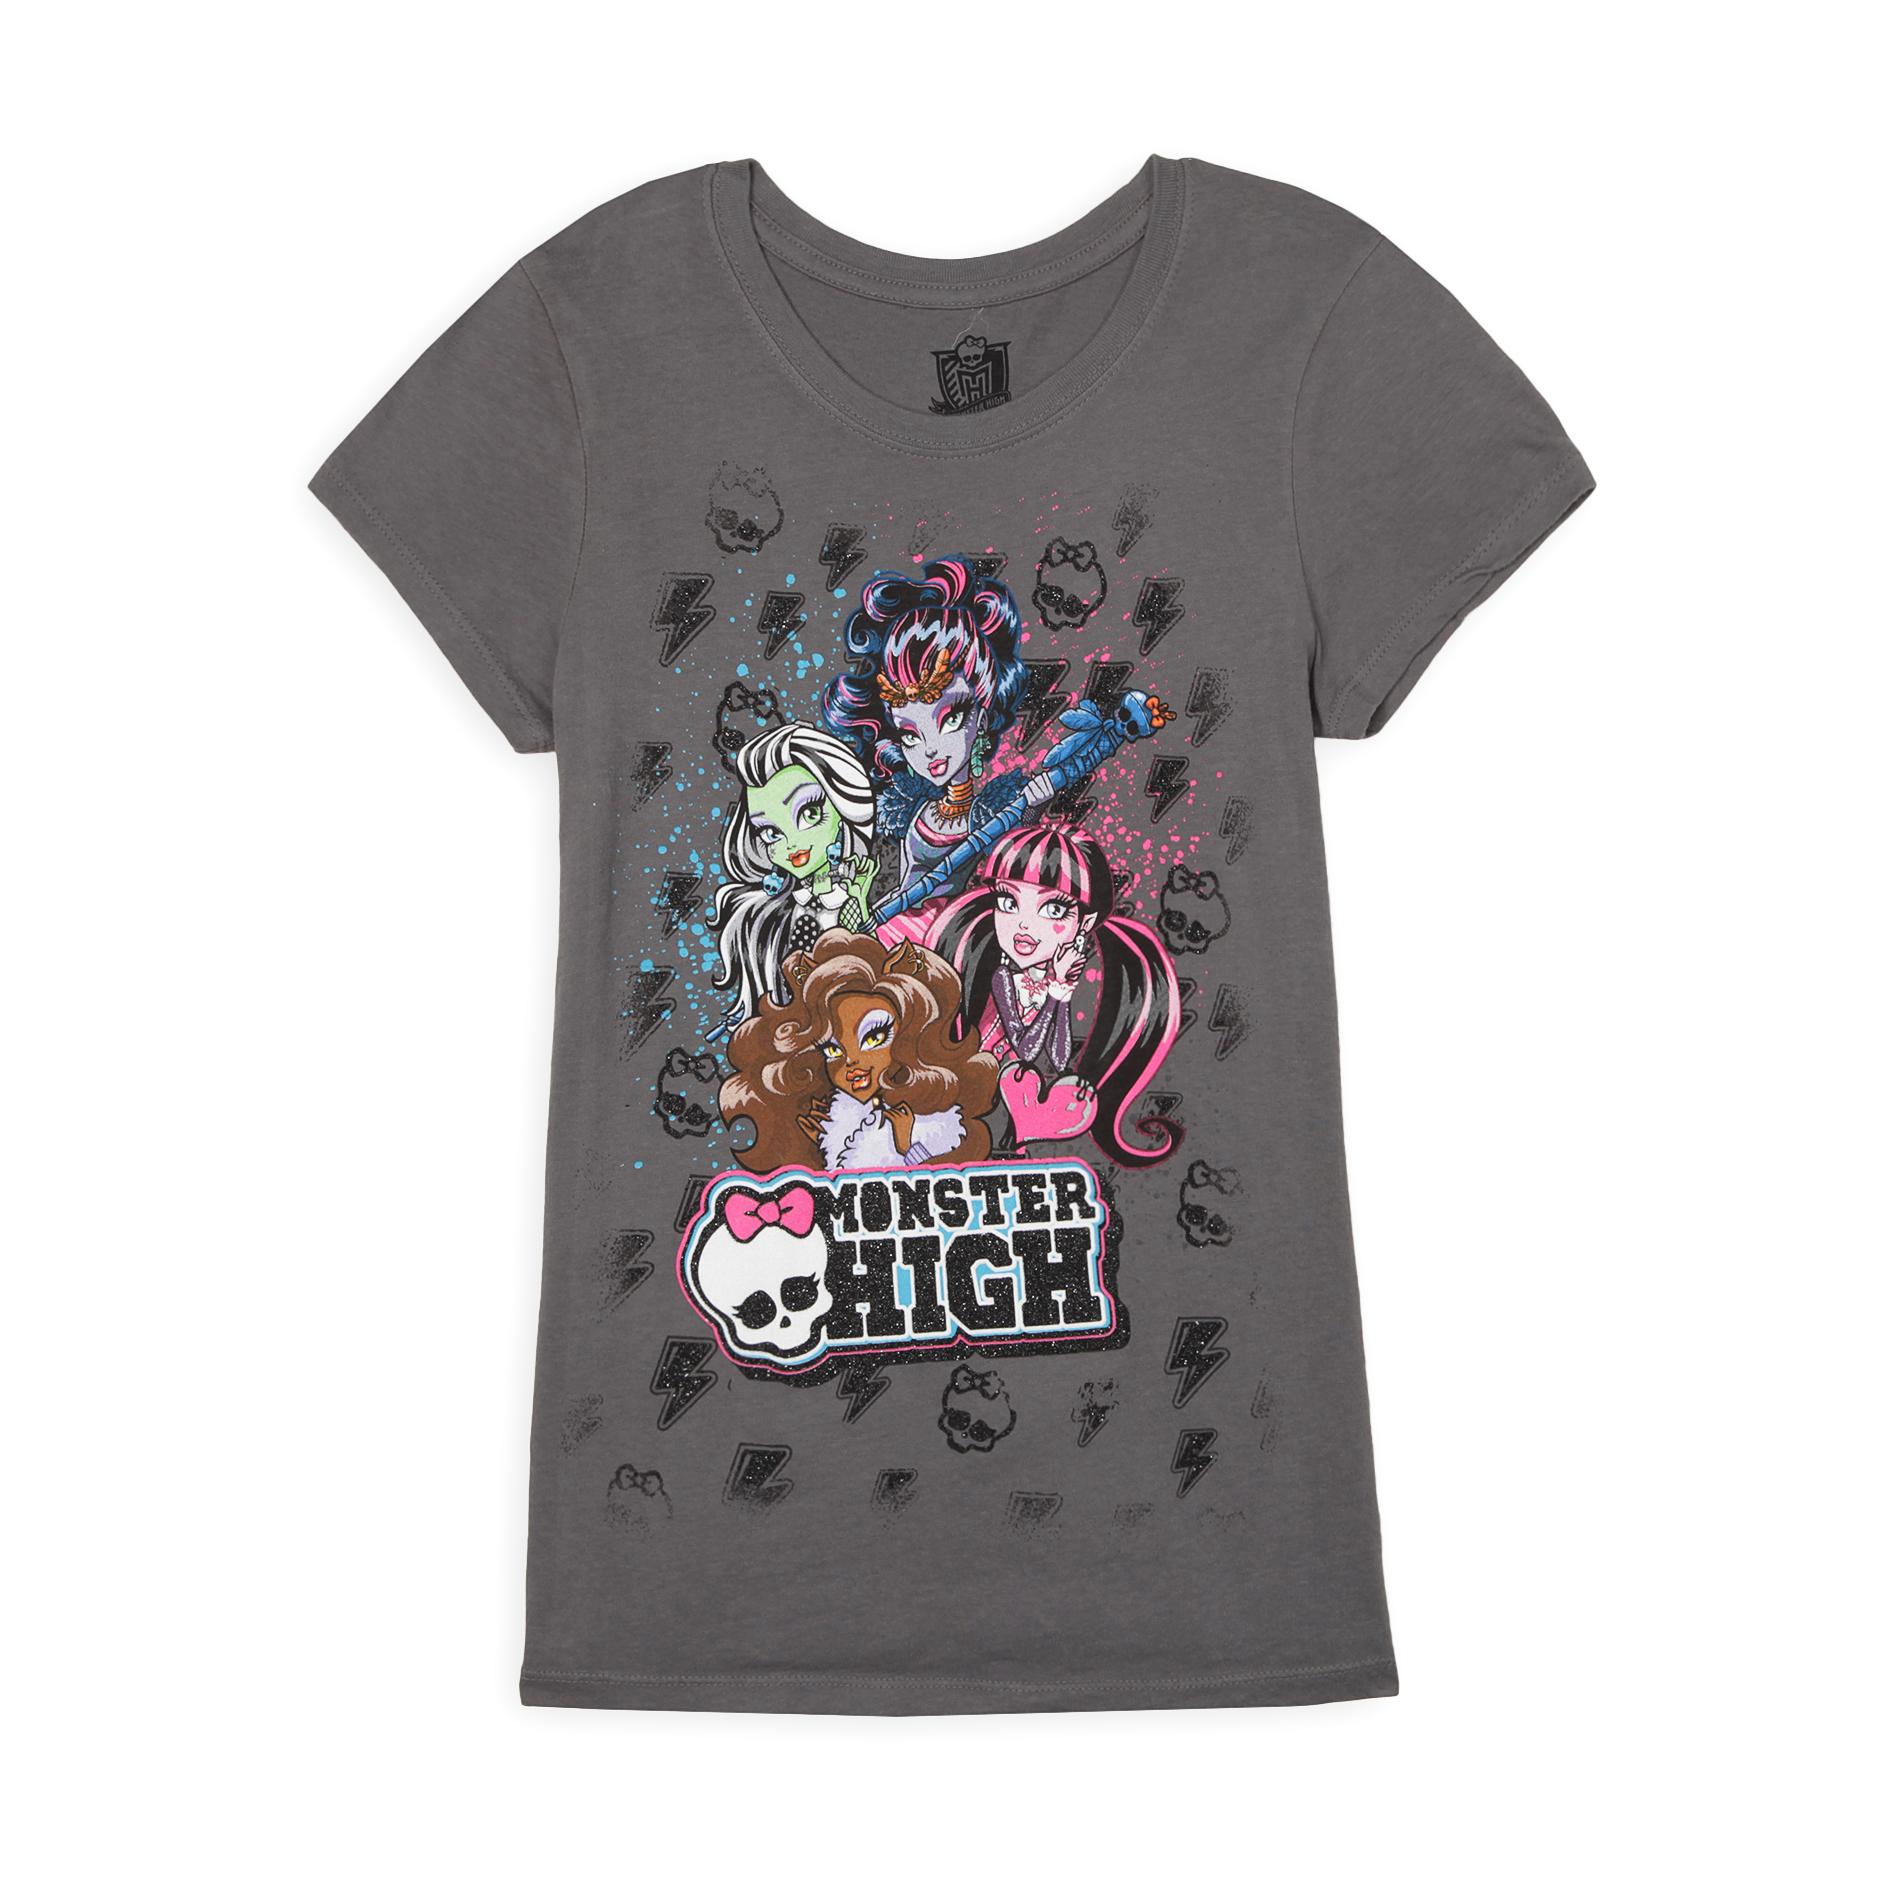 Monster High Girl's Graphic T-Shirt - Ghoulfriends